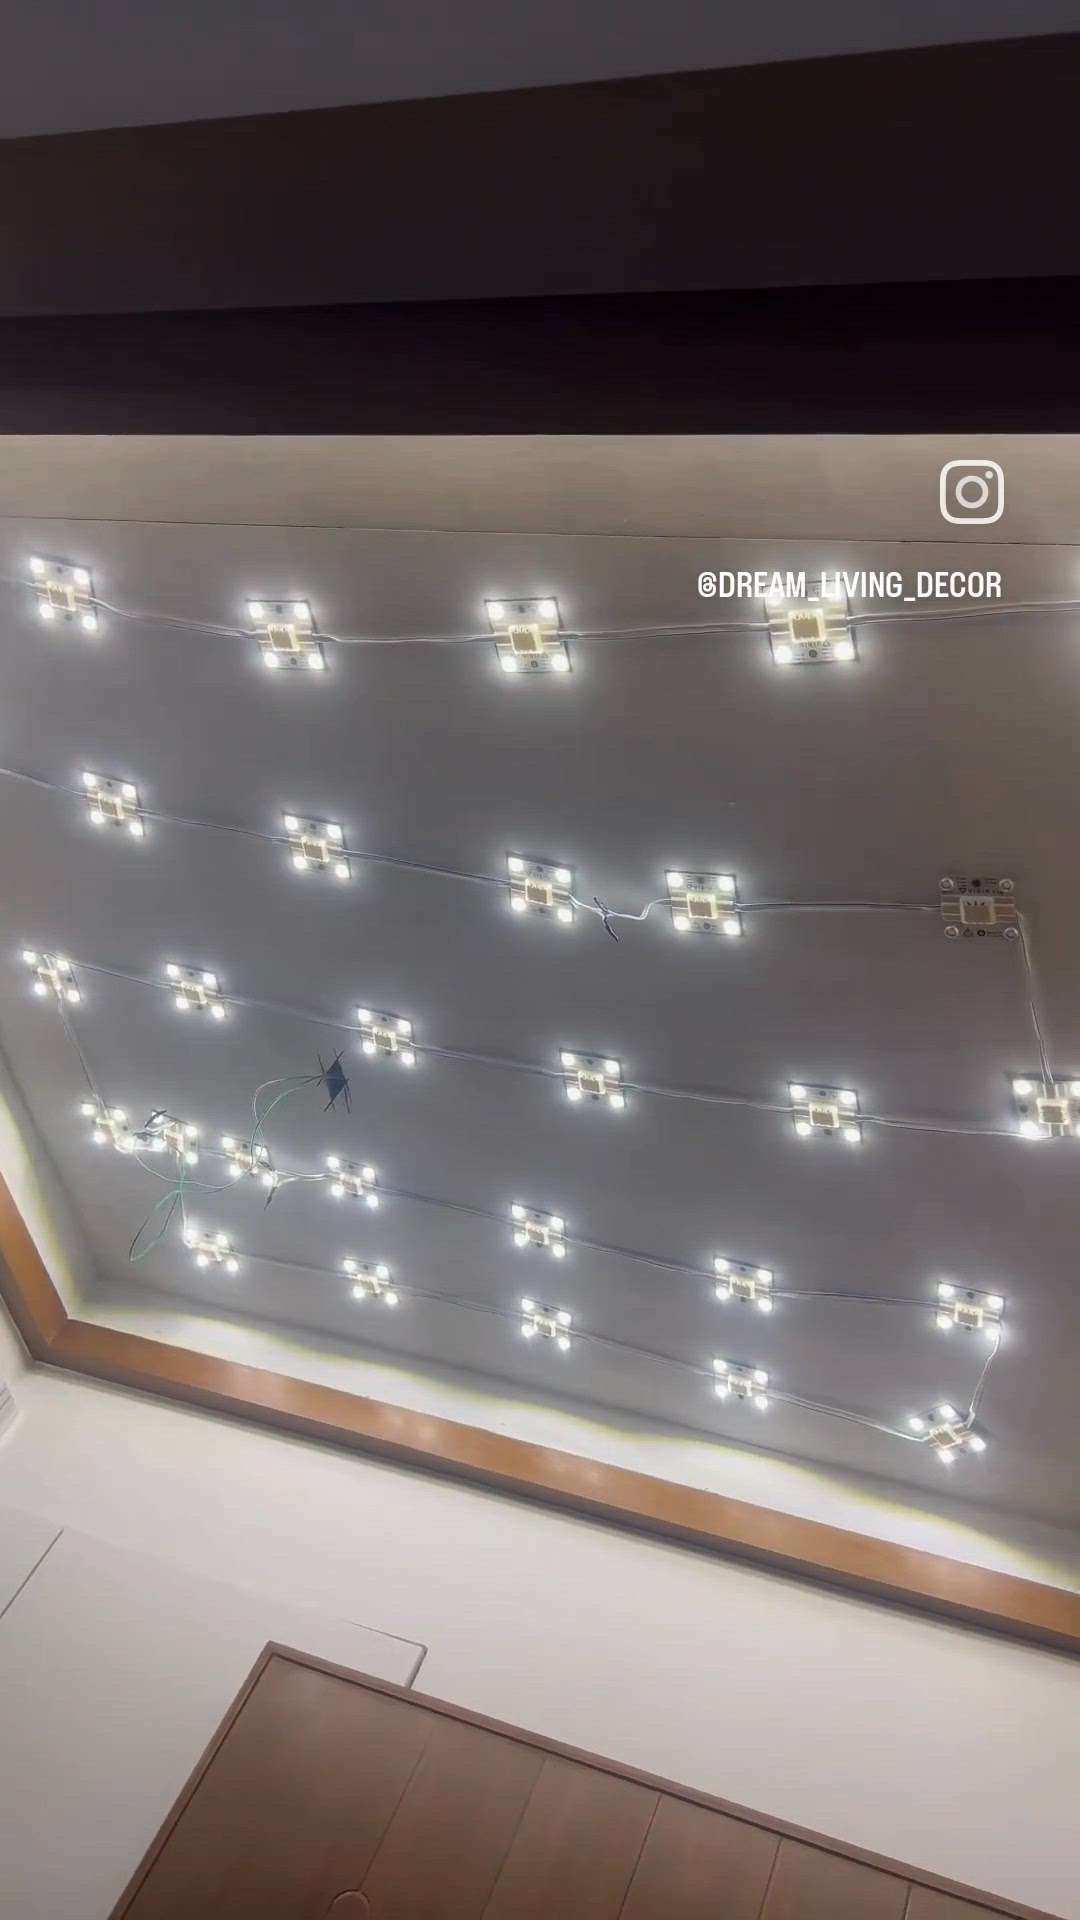 STRETCH CEILING AVAILABLE
VERY ECONOMICAL AND BEST PRICE'S

 #strechceling  #CelingLights  #celingdesign  #celingandwall  #InteriorDesigner  #wallpannel  #wallpaperrolles  #indorecity  #indorehouse 

We Are Wholesalers We Have a Huge Range Of Interior Products So Just Try Once And Get The Best Rates, Products & Services.
 #InteriorDesigner  #InteriorDesigner